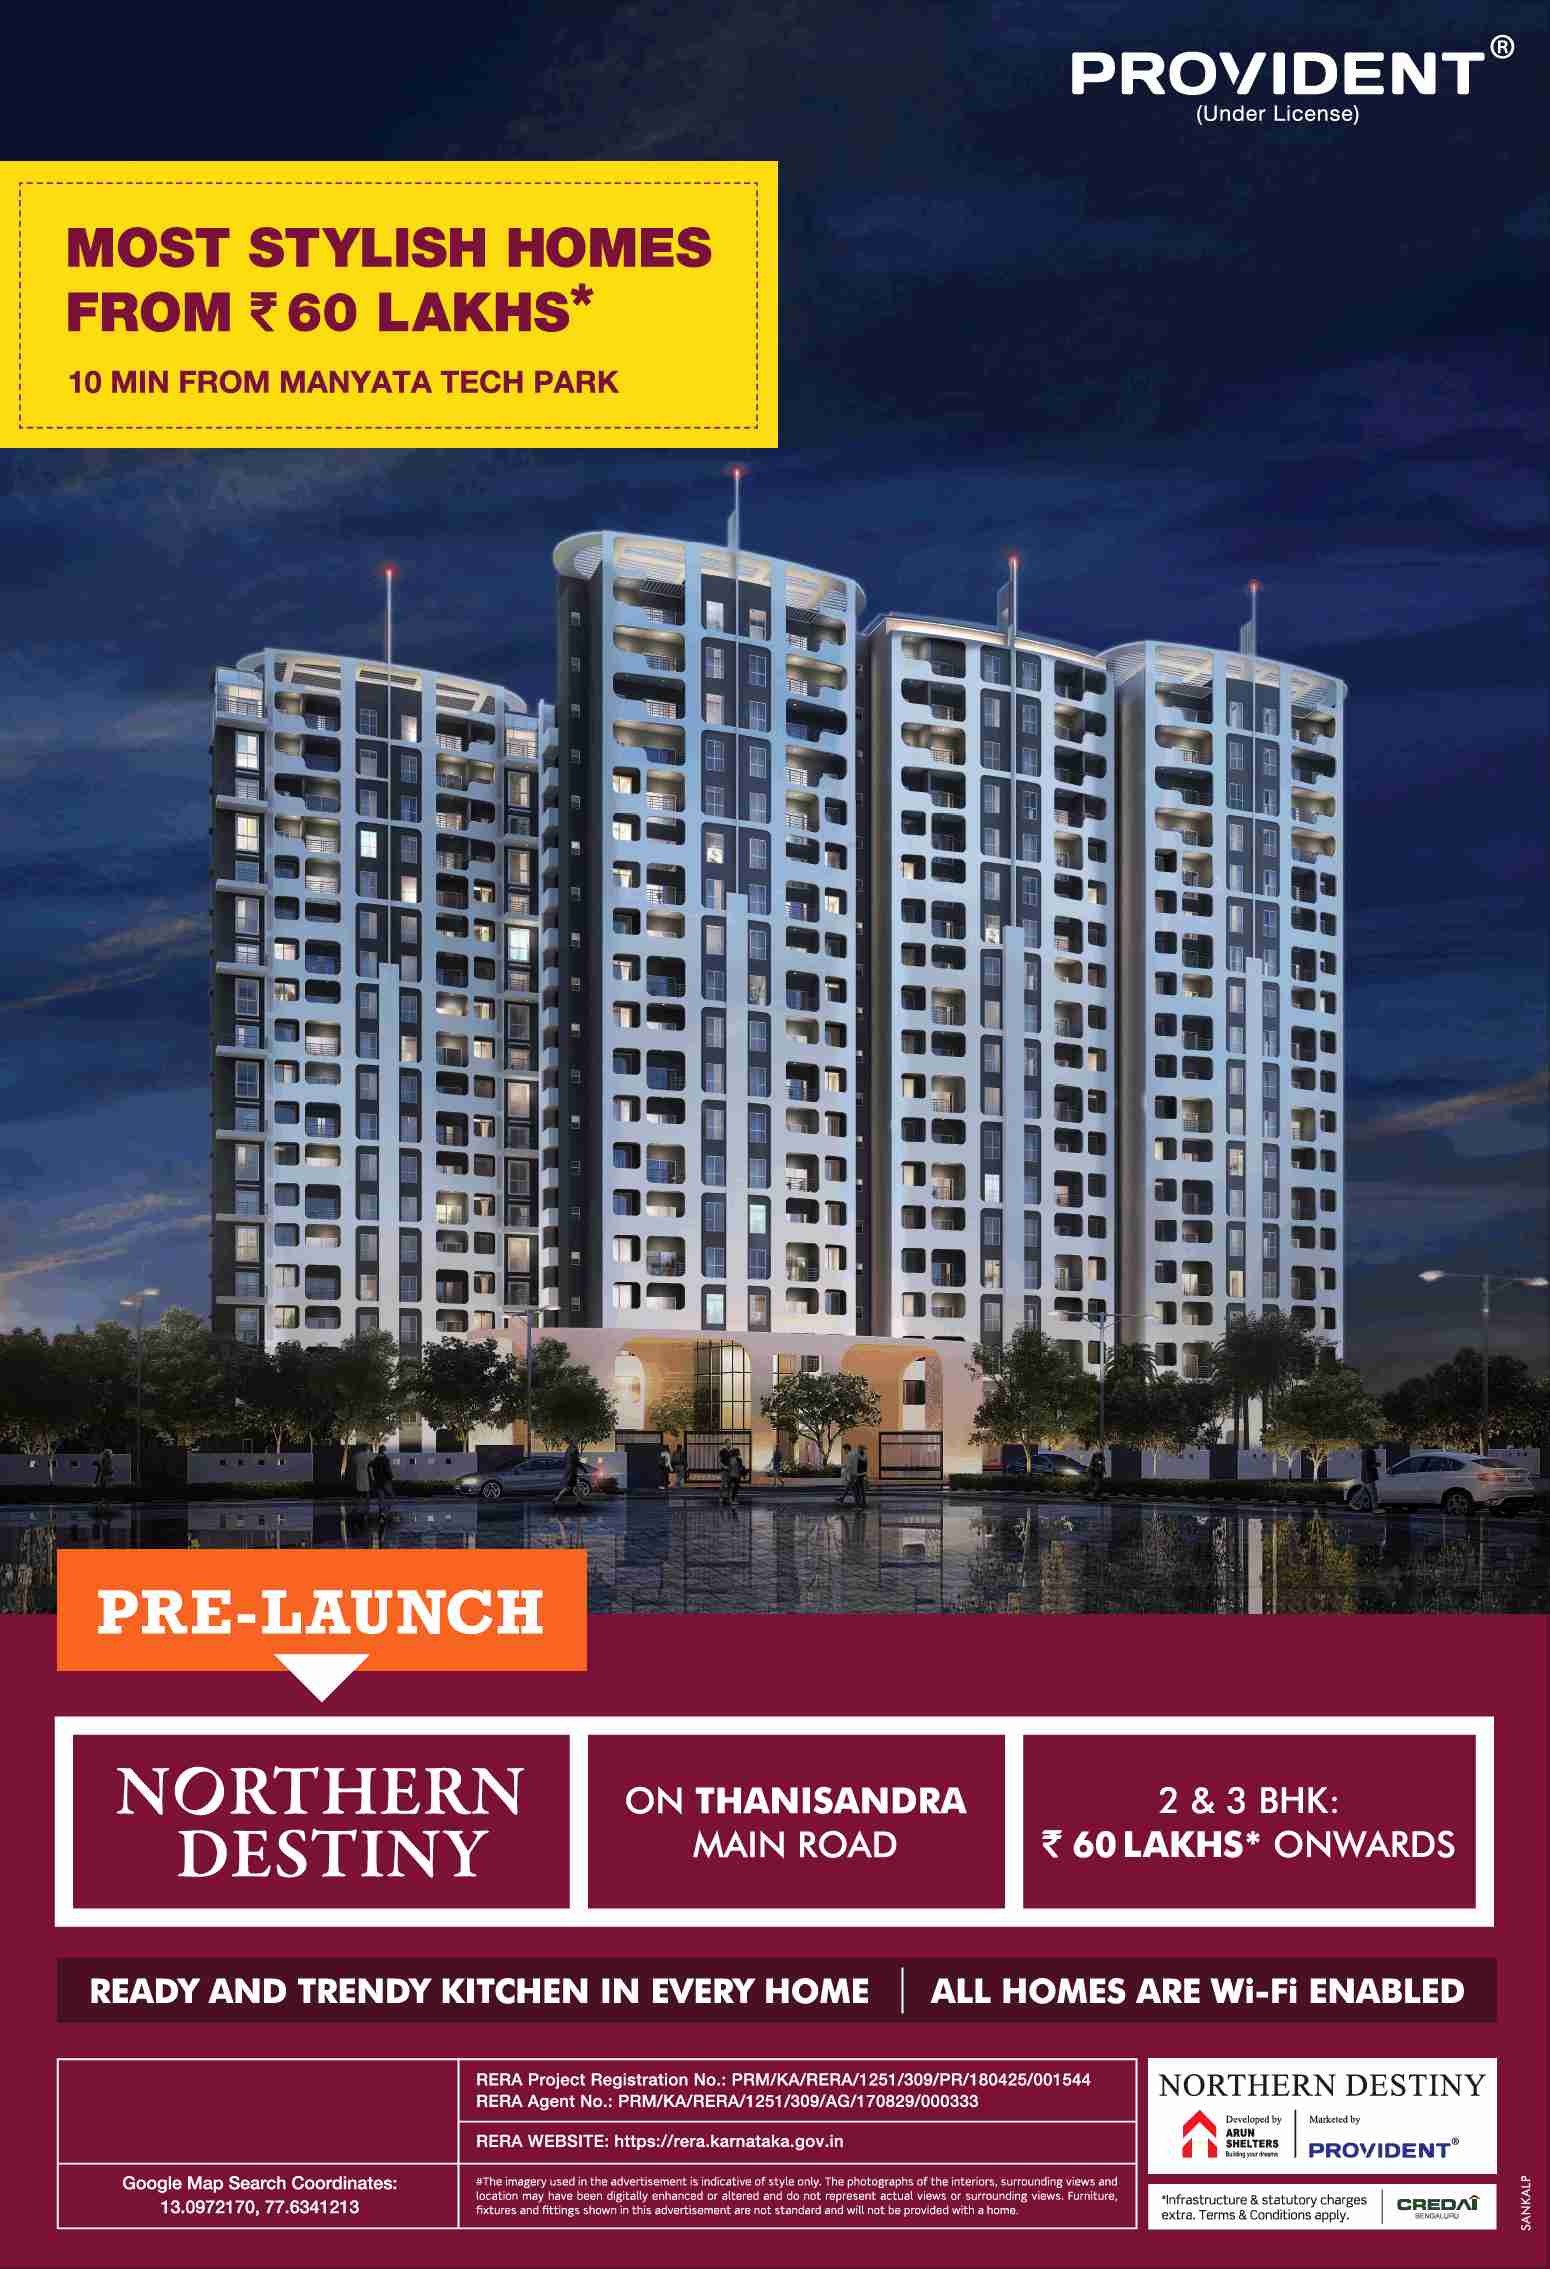 Get ready and trendy kitchen in every home at Provident Northern Destiny in Bangalore Update